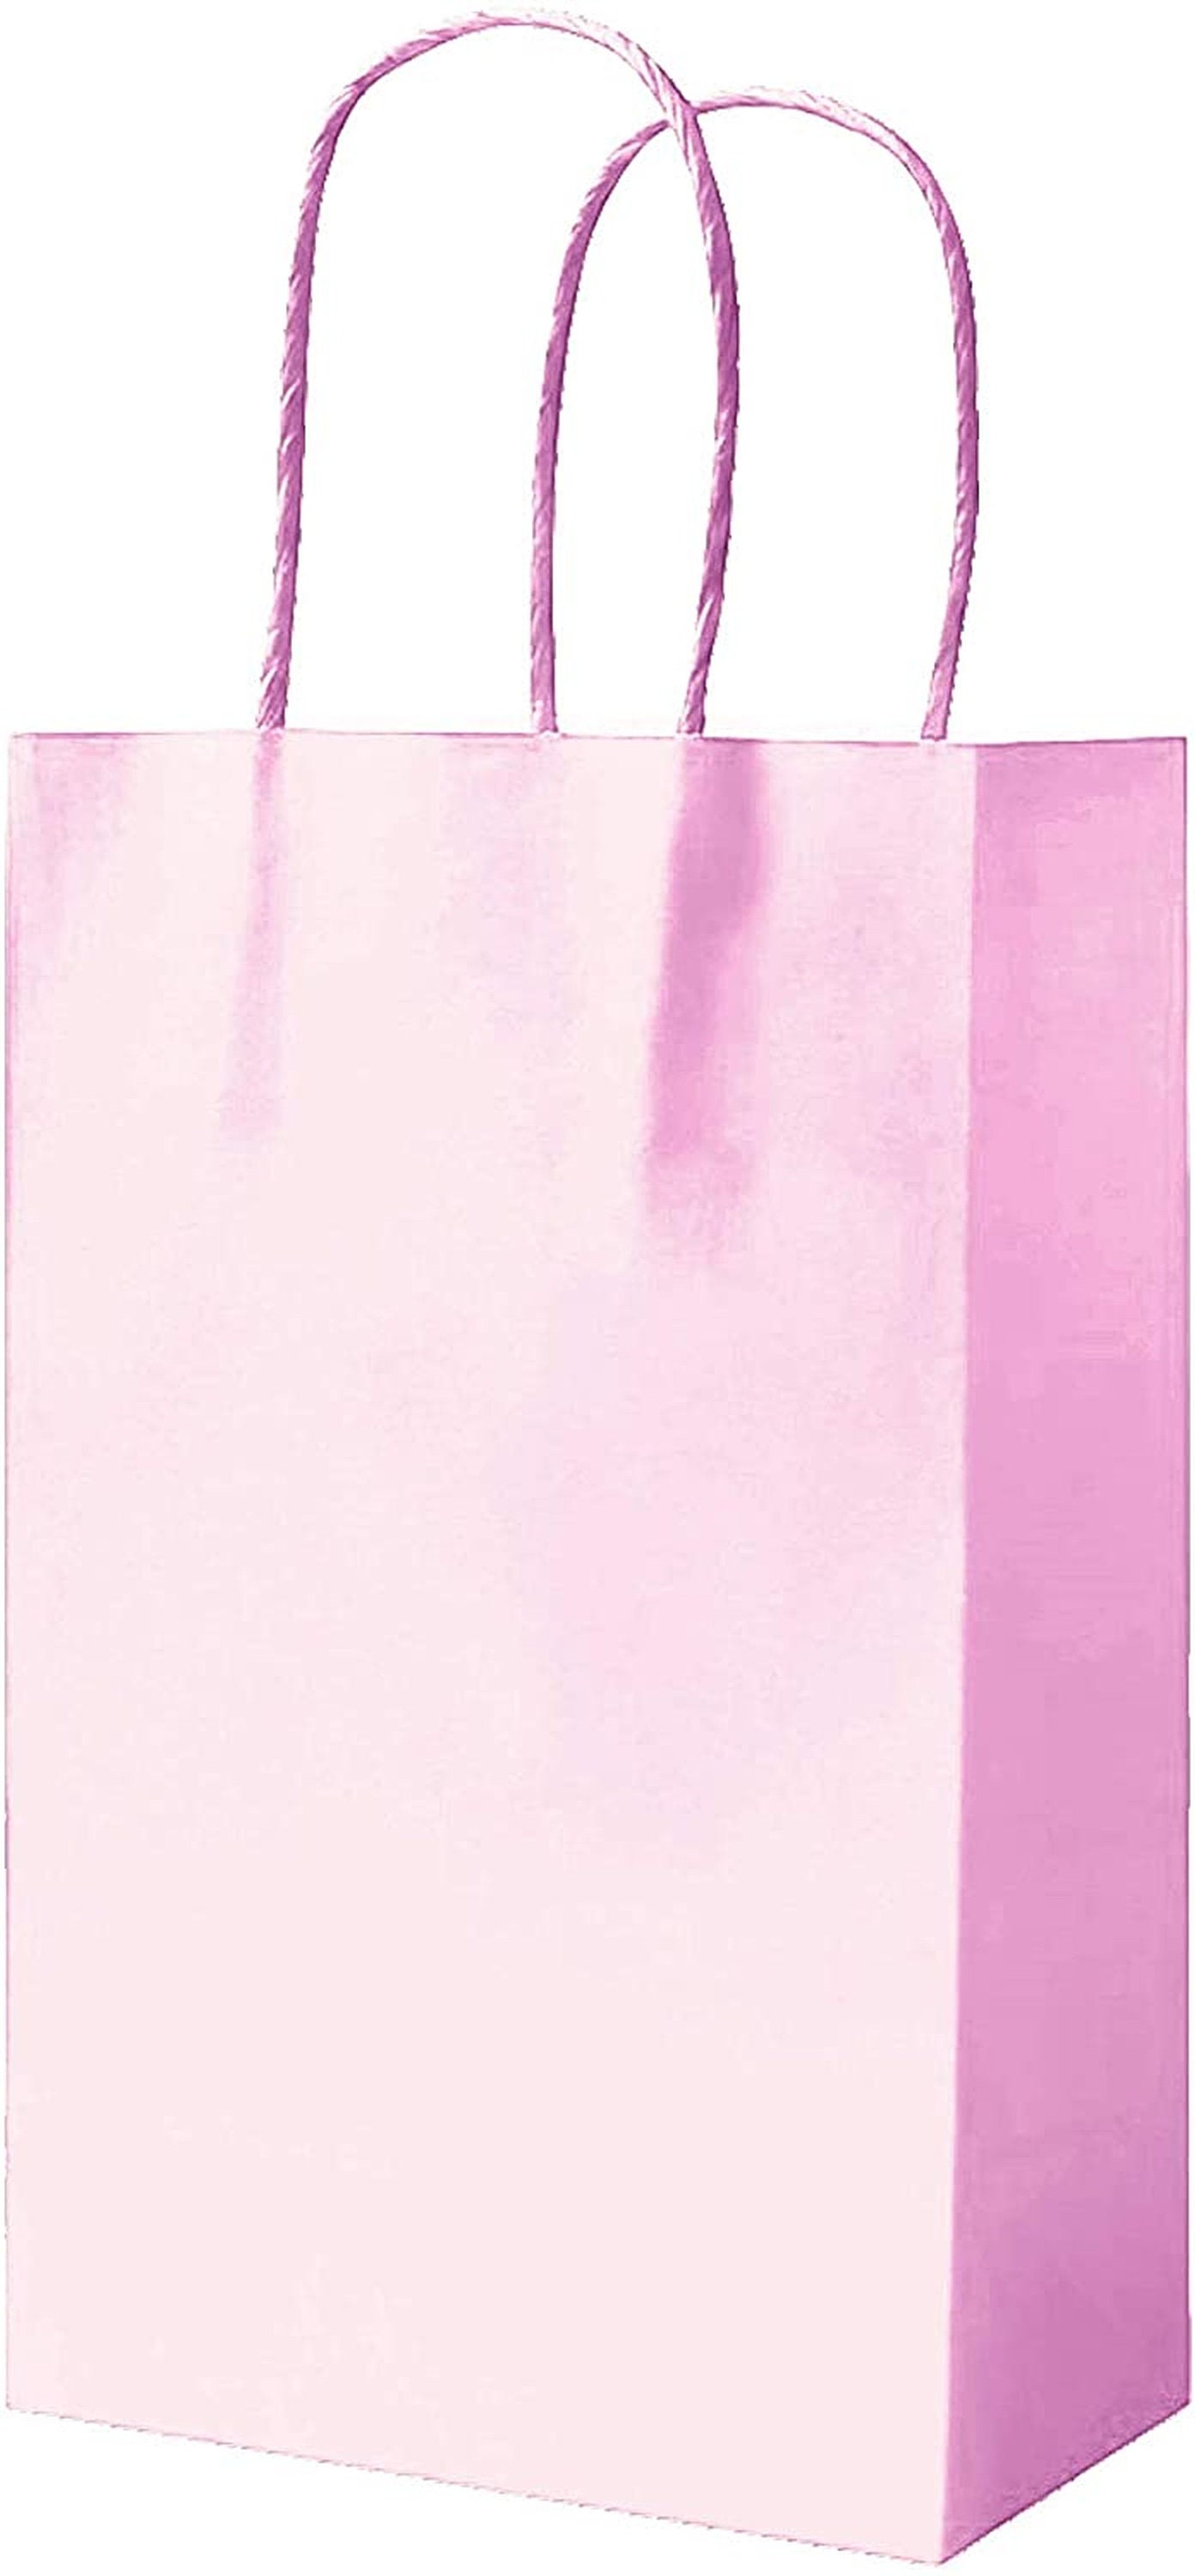 Hammont Paper Bags with Handles – Pink Gift Bags Bulk Medium Size 200 Pack  Paper Craft Bag – Kraft Bags with Window - Transparent Gift Bags - Party